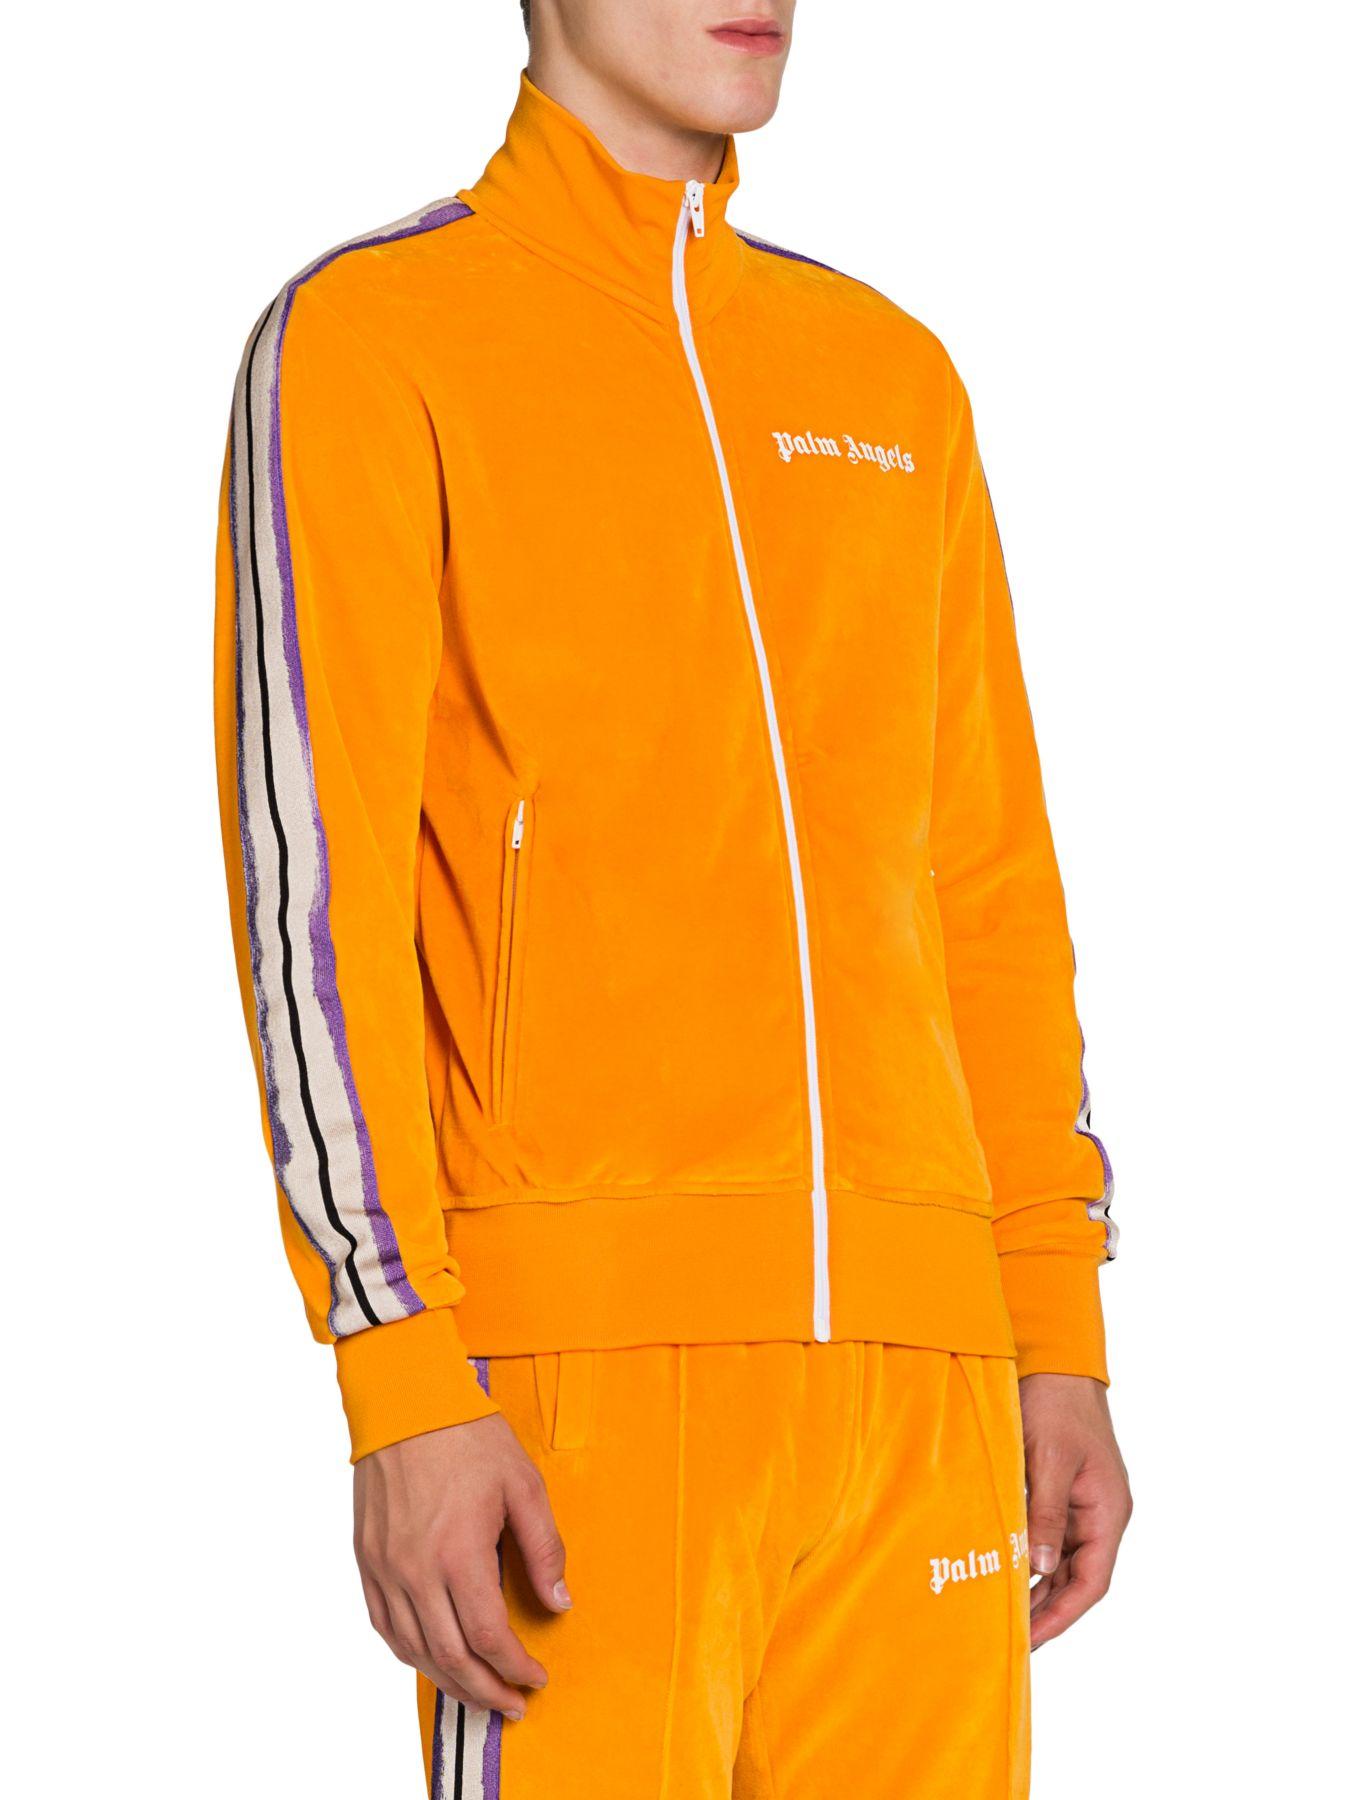 Palm Angels Classic Track Jacket in Yellow & Orange (Orange) for Men - Lyst